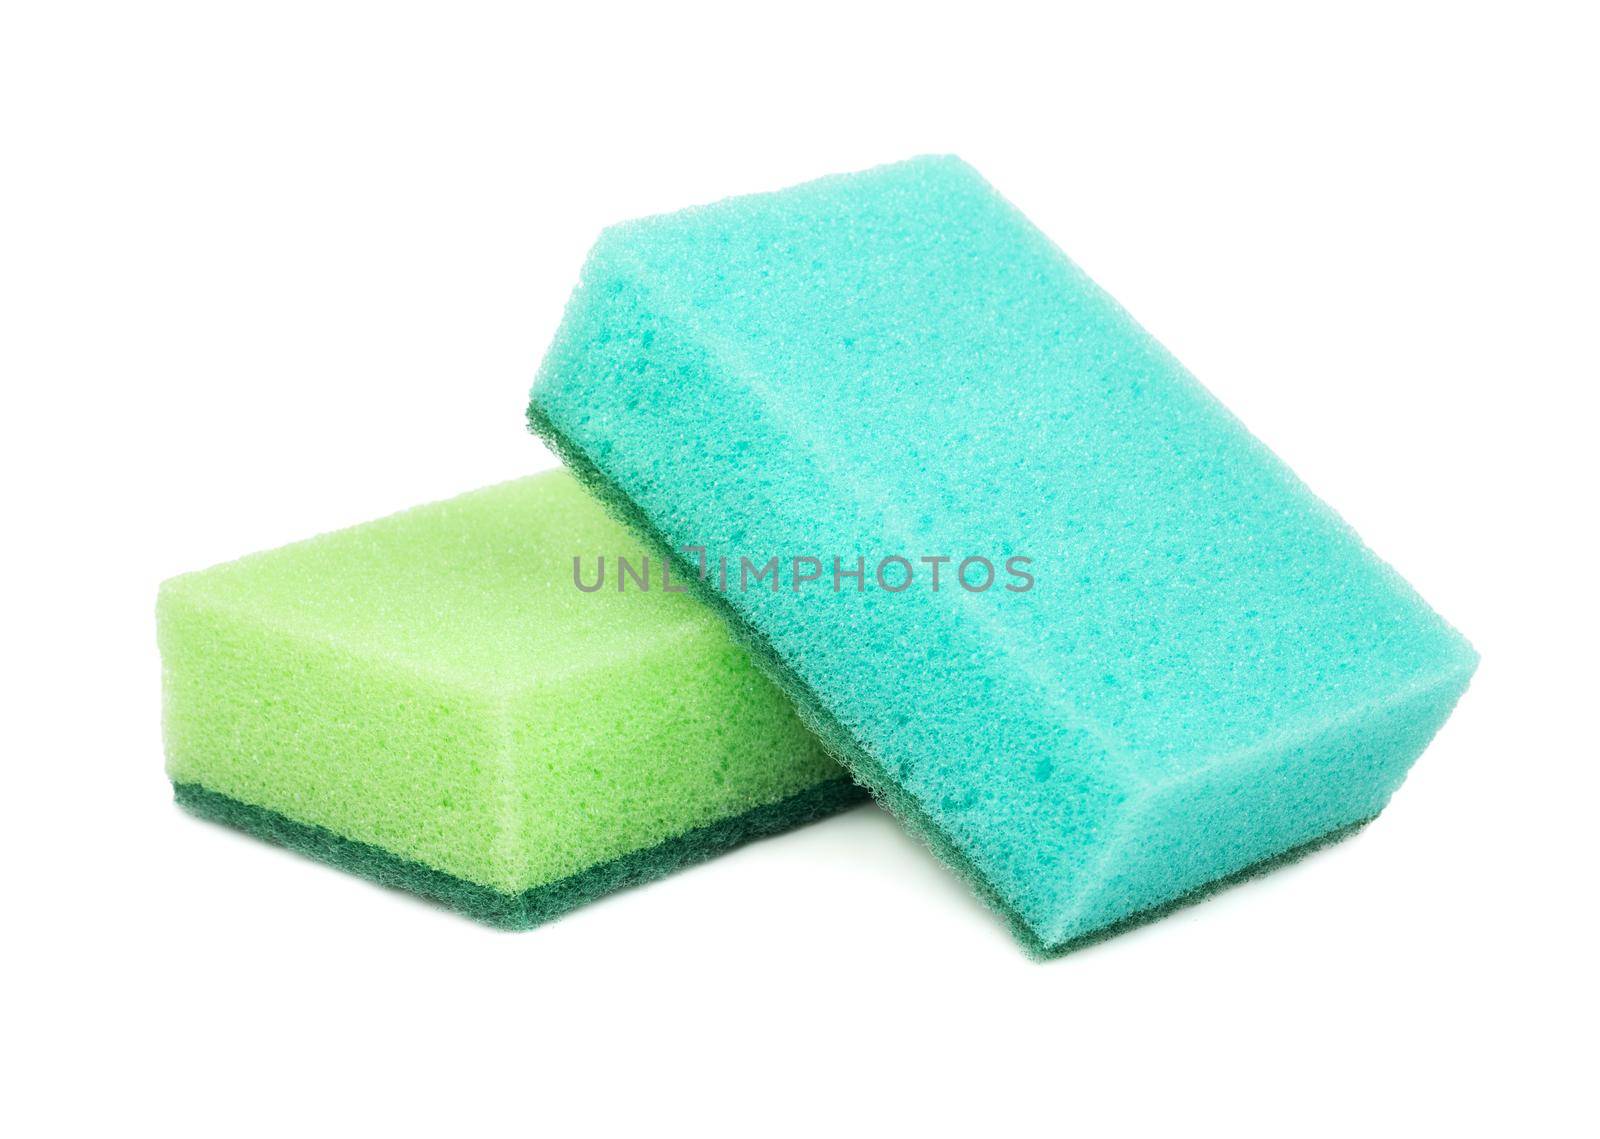 Dish washing sponge by andregric